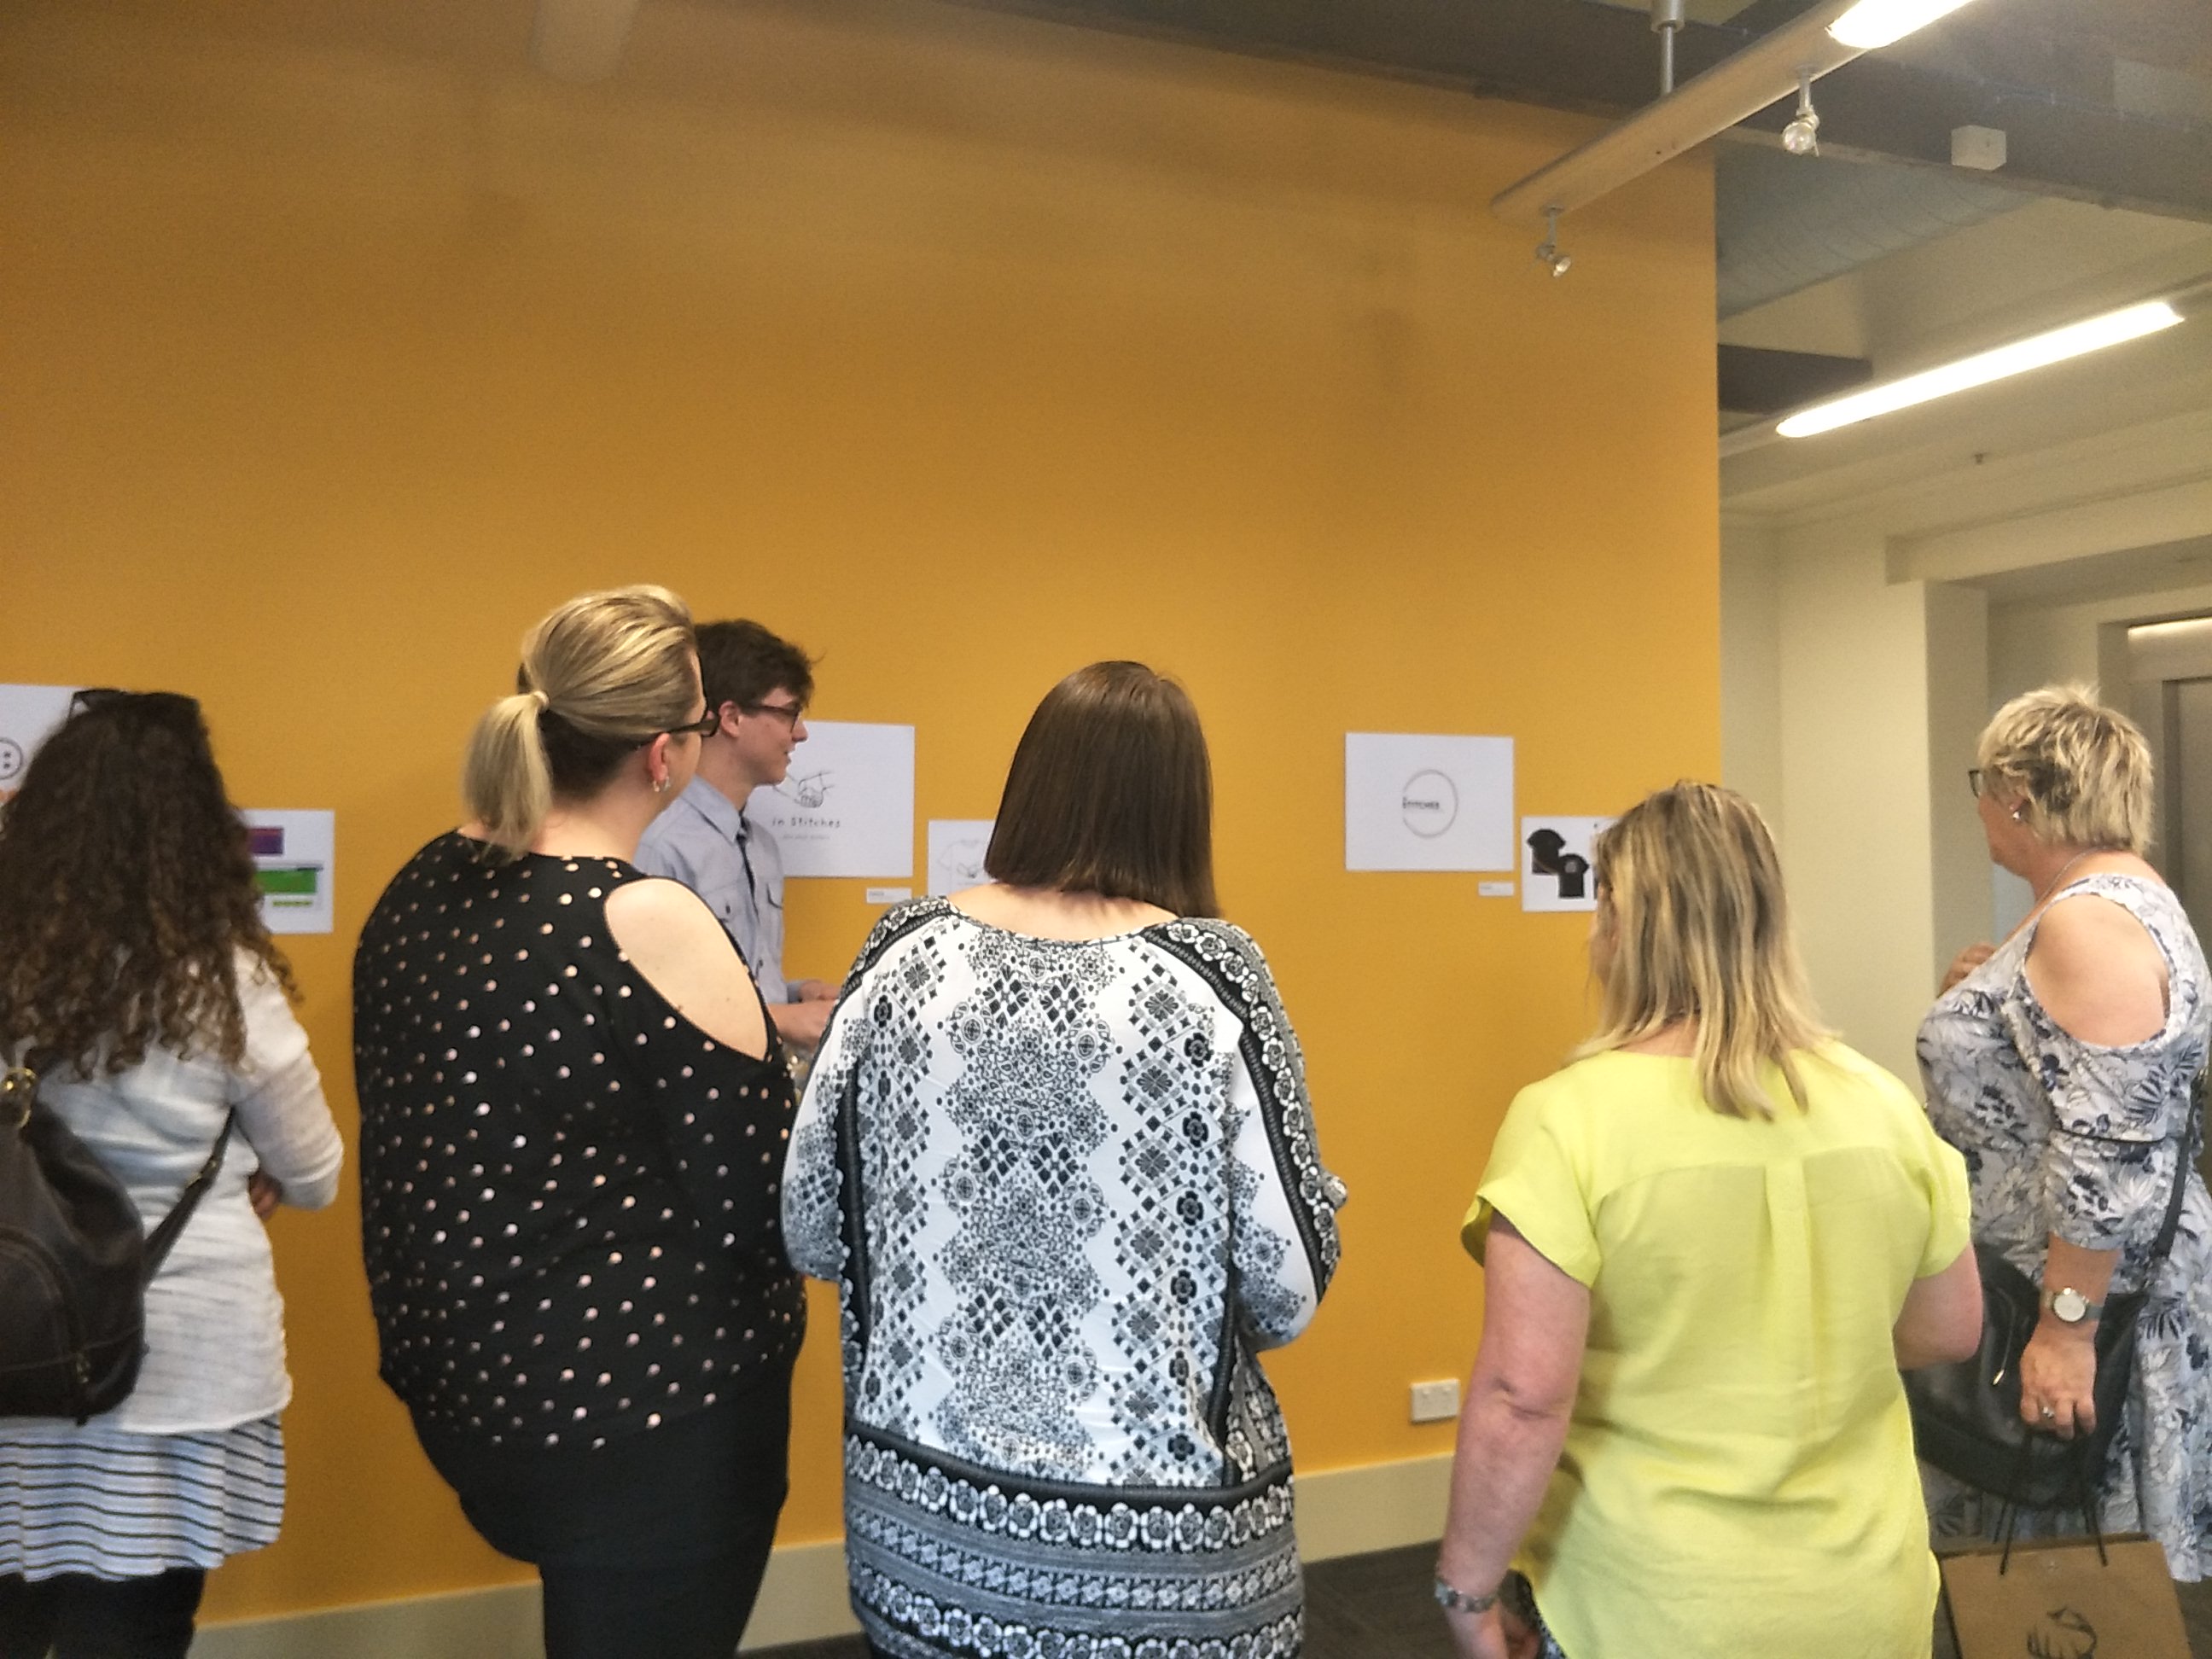 People looking at student work displayed in the Freerange Future office space.